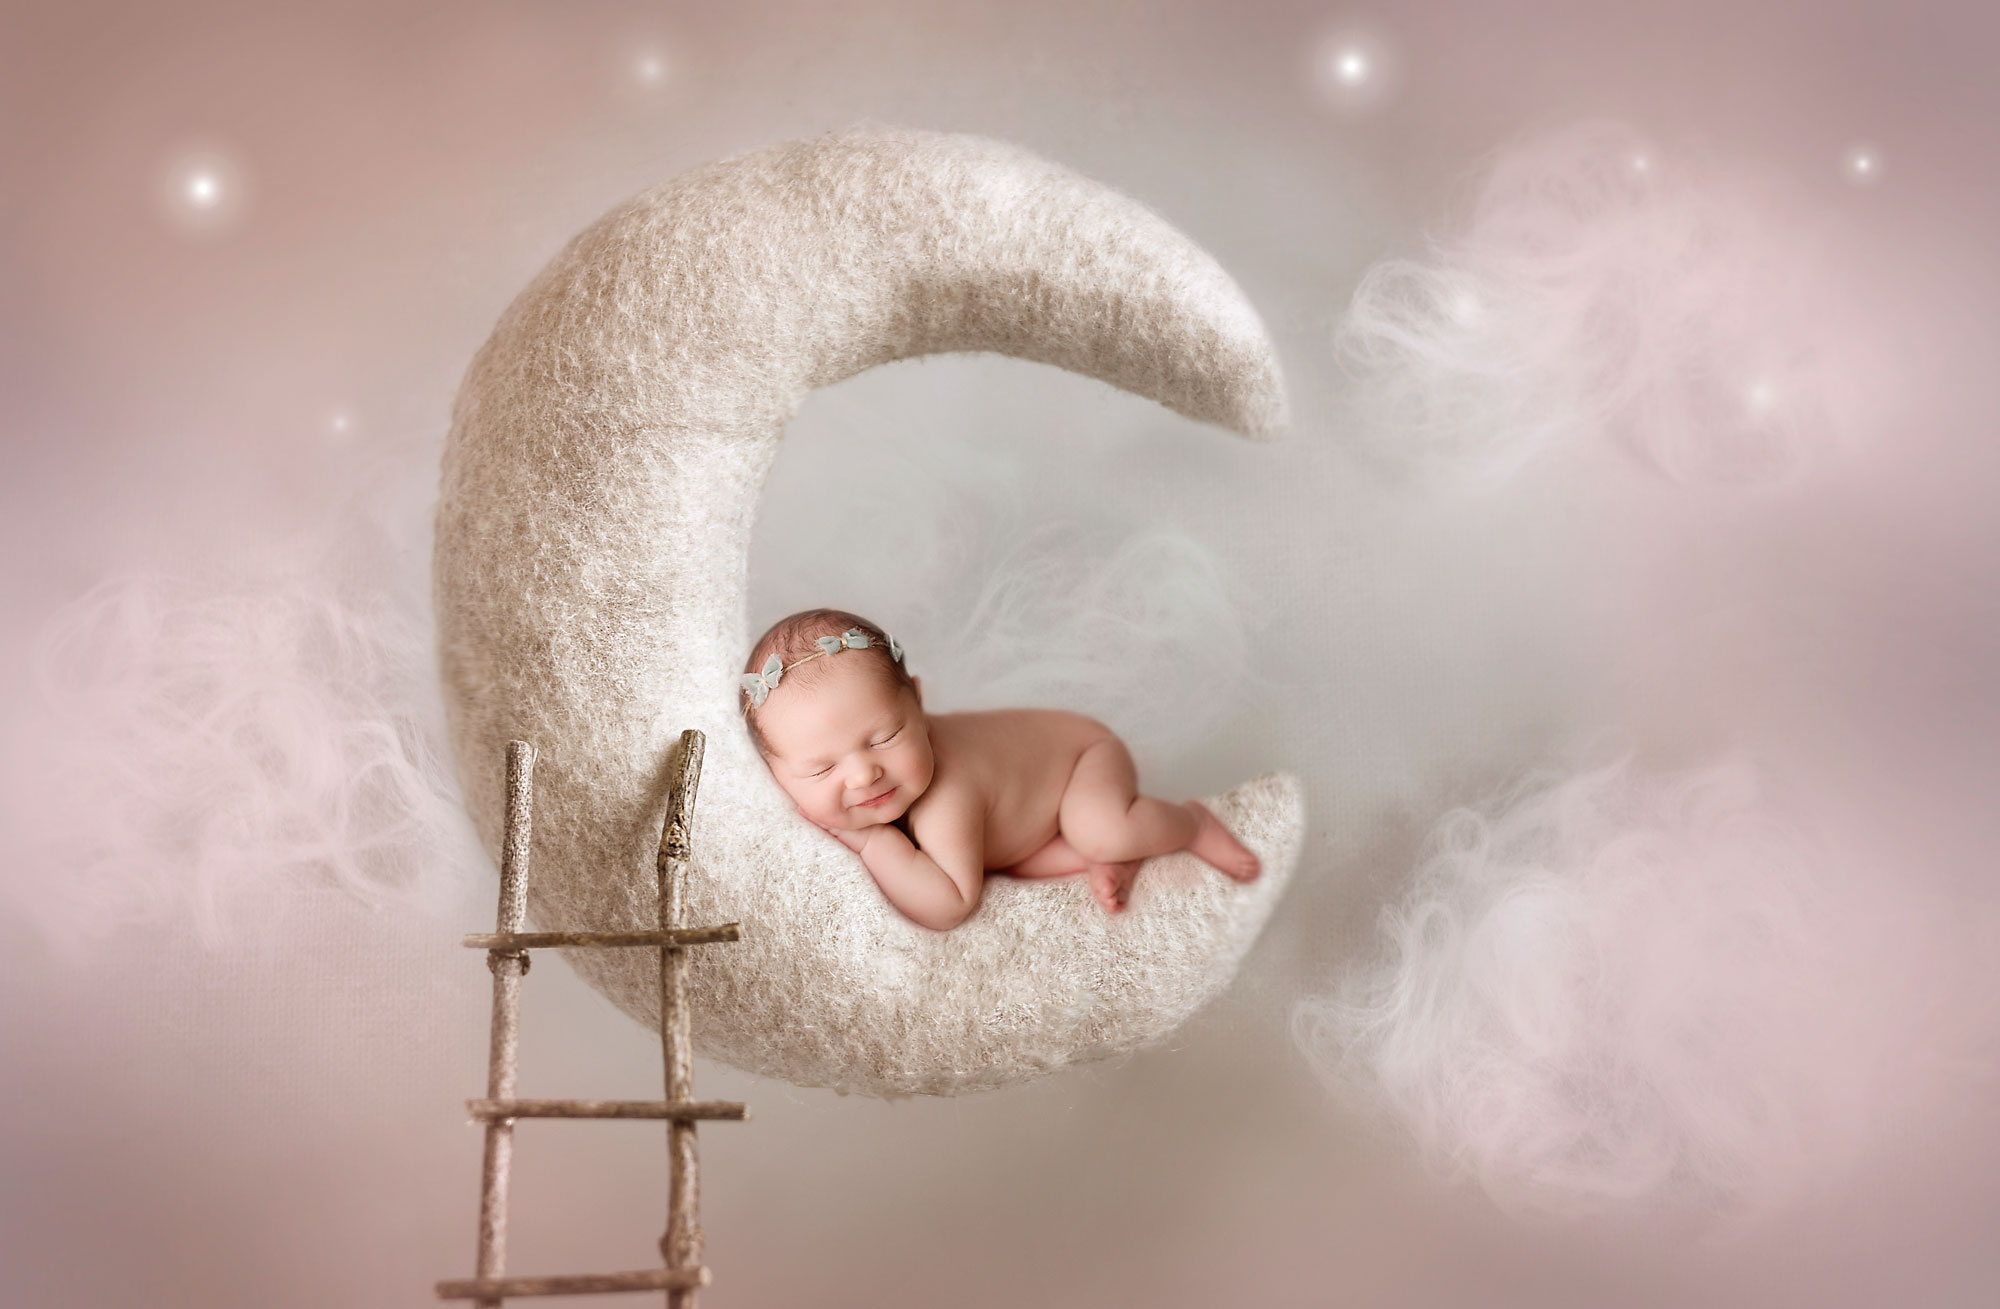 magical newborn photography nj, baby girl asleep on suspended moon with wooden ladder and starry sky backdrop